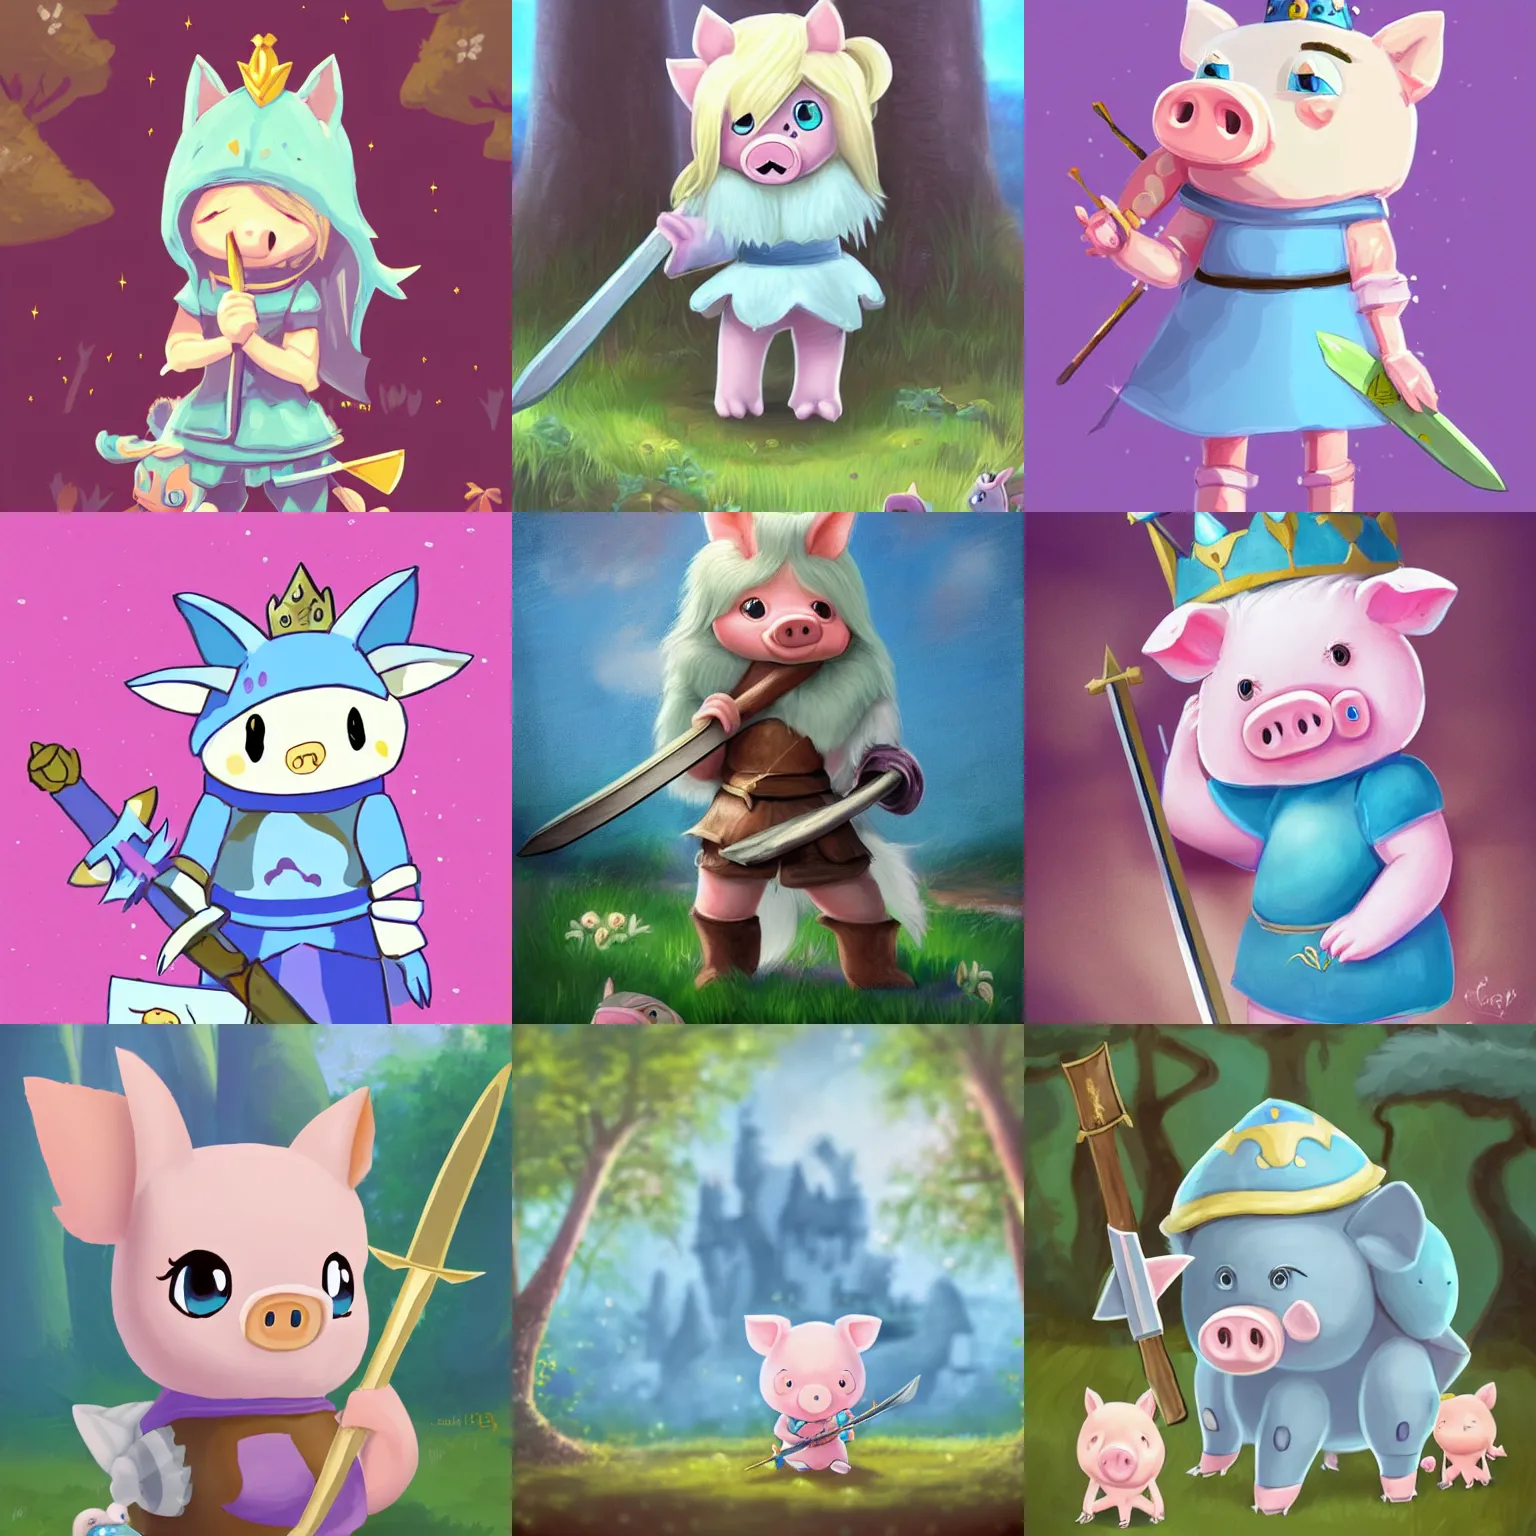 Prompt: very cute and adorable anthro little piggy knight princess portrait, holding a sword, adorable blue eyes, piglet, fantasy forest landscape, lake, summer, pale blue outfit, cute forest creature, fluffy, pastel colors, Adventure Time, Dreamworks, Behance, Pokemon, Artstation, trending on artstation, peach and goma style, milk and mocha style, art of silverfox, Yee Chong Silverfox, Sydney Hanson, Sofya Emelenko, Elina Karimova